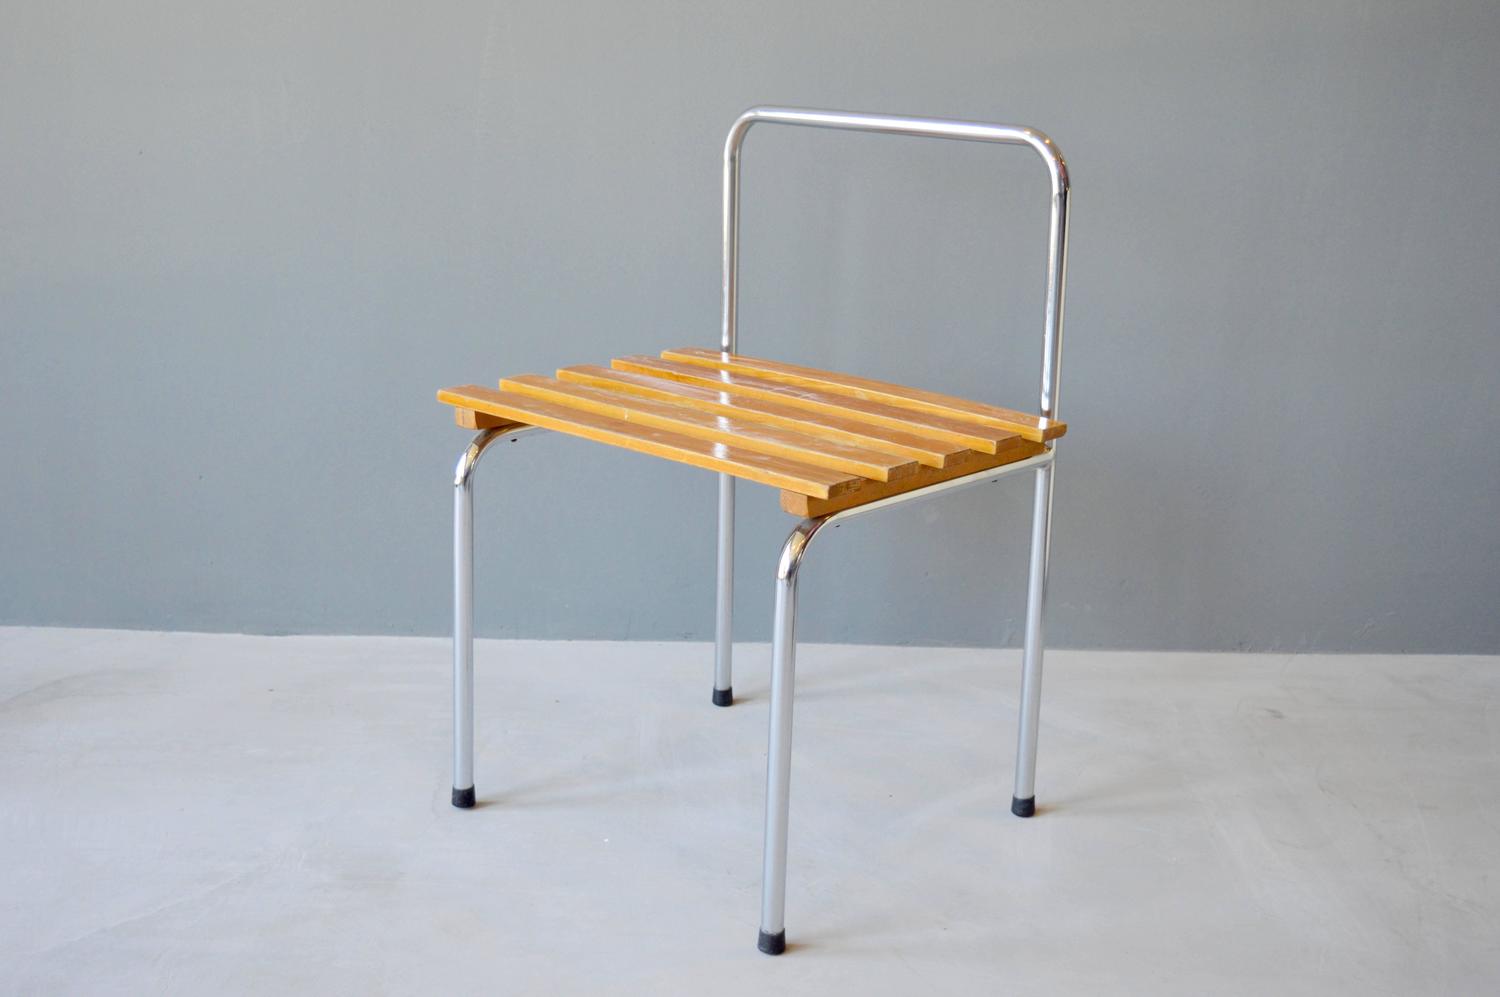 Charlotte Perriand Luggage Racks-Stools for Les Arcs, 1960s France